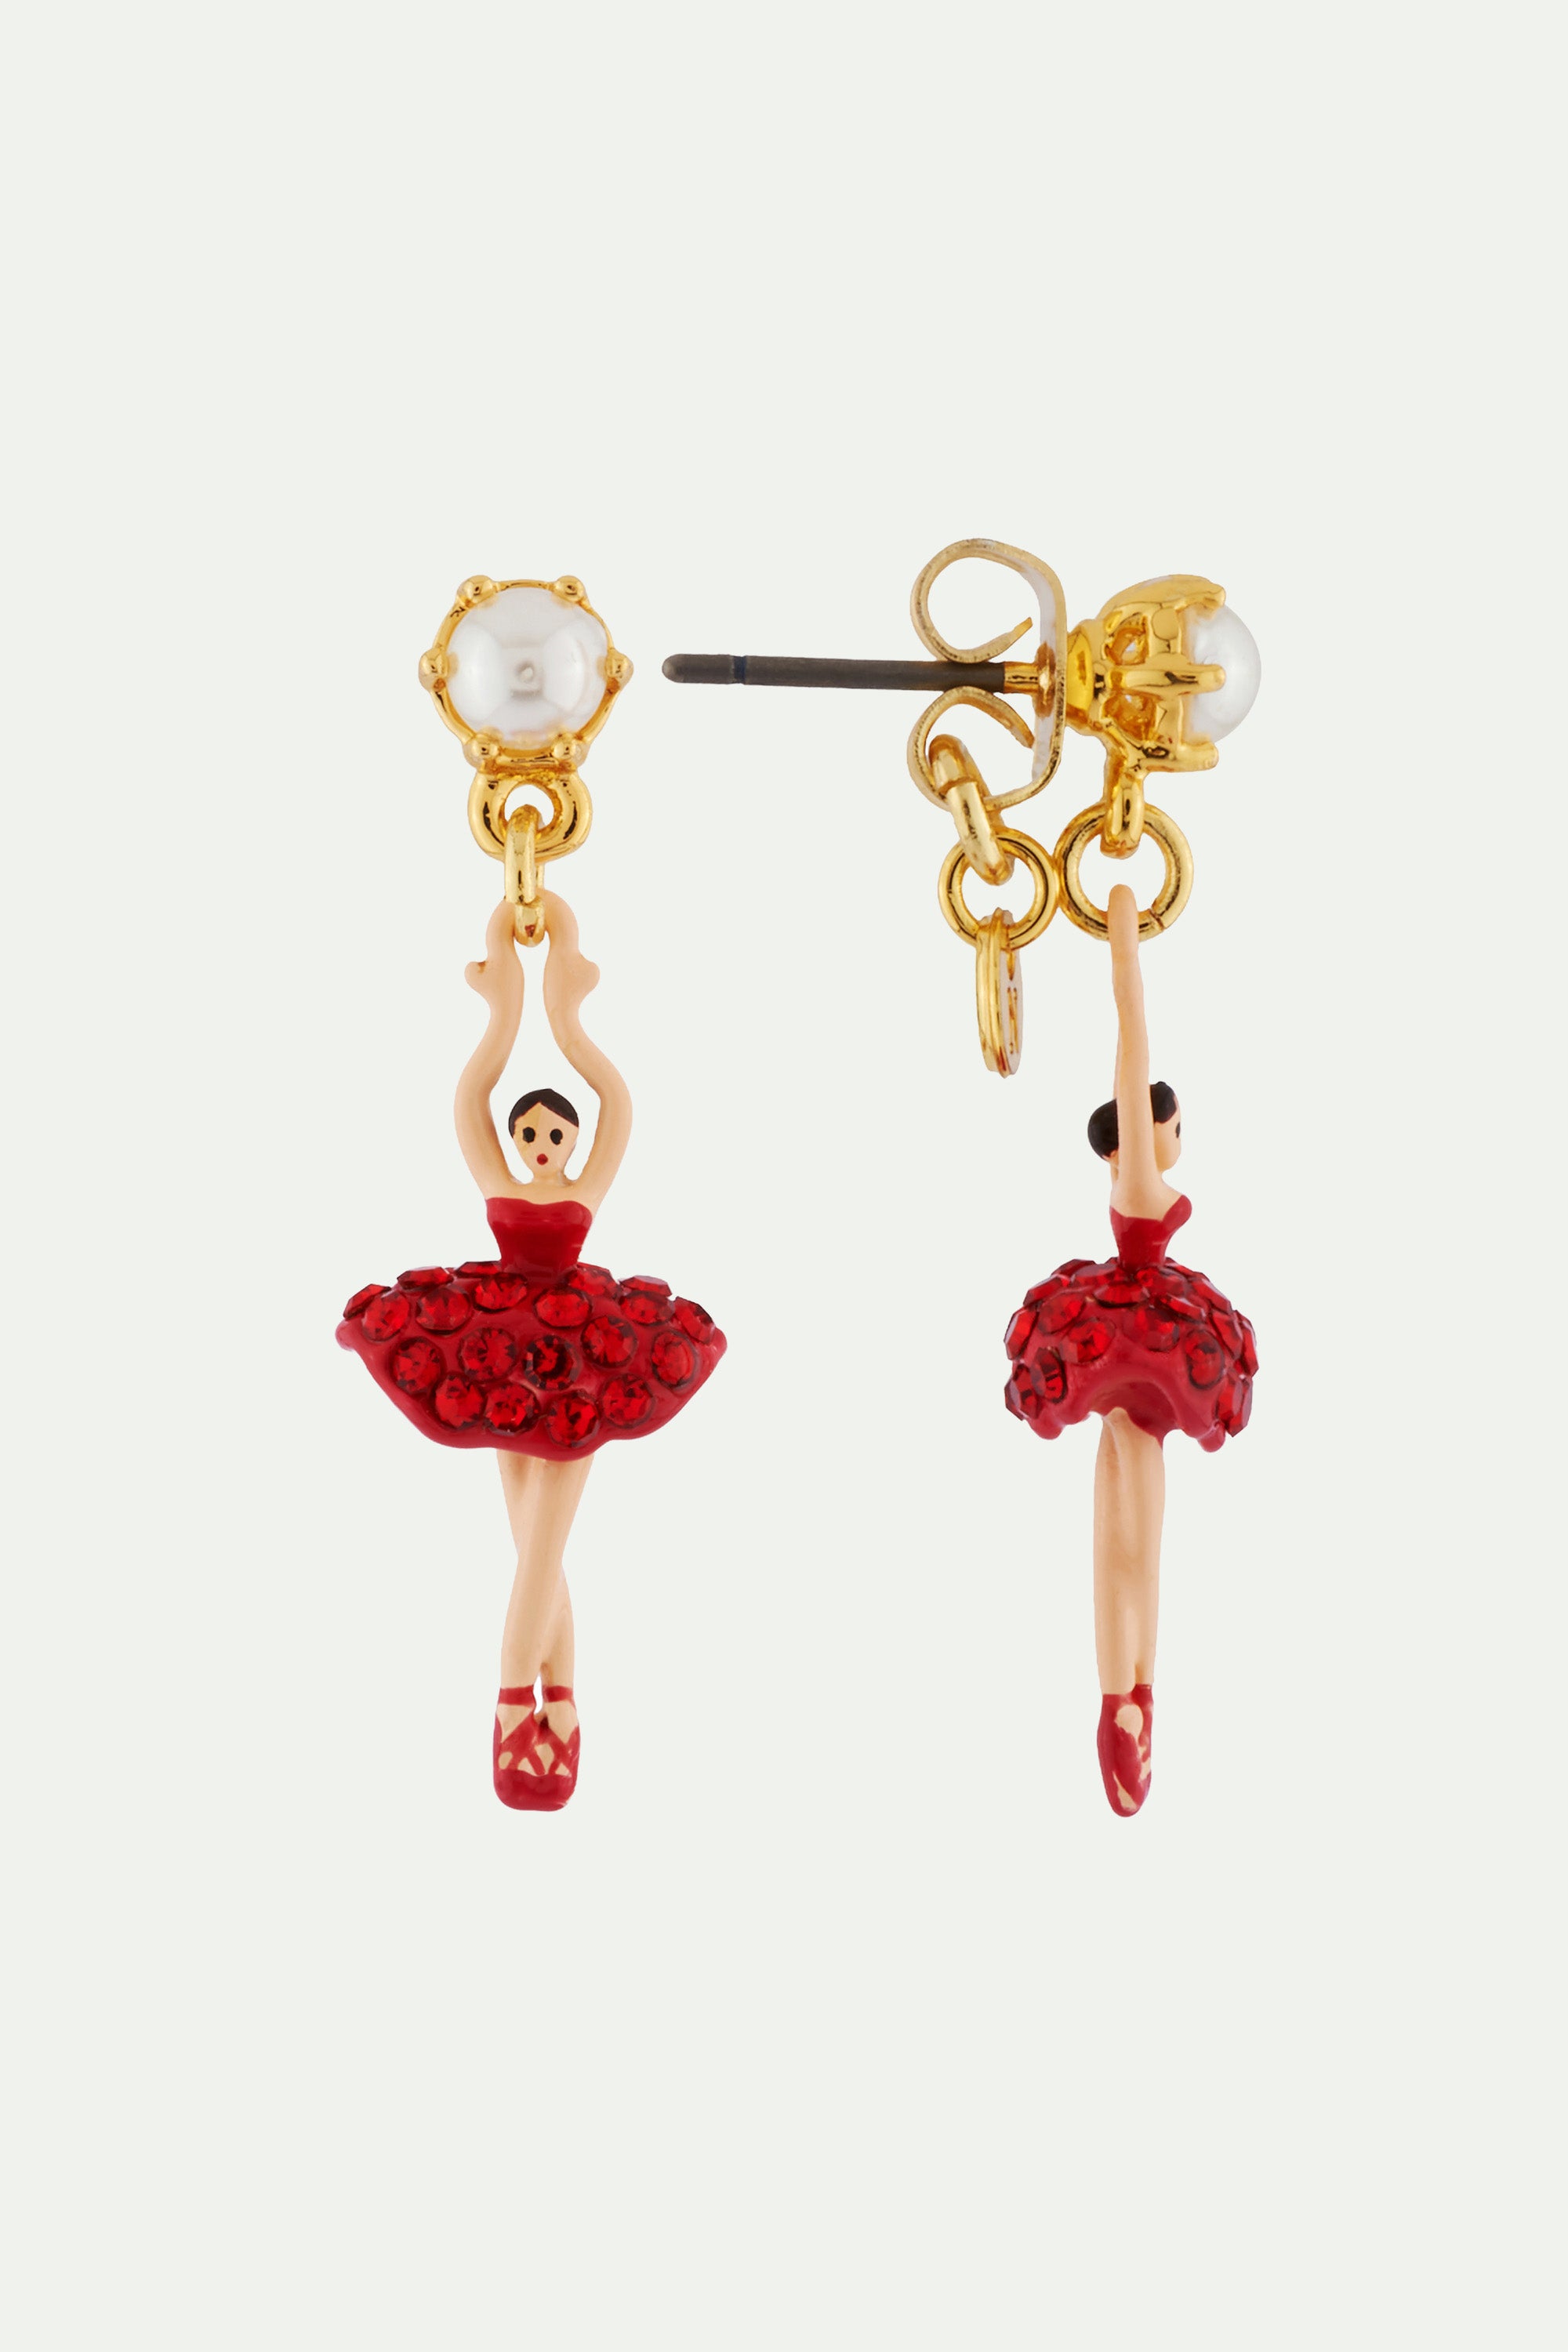 Clip on earrings mini-ballerina wearing a tutu paved with red rhinestones